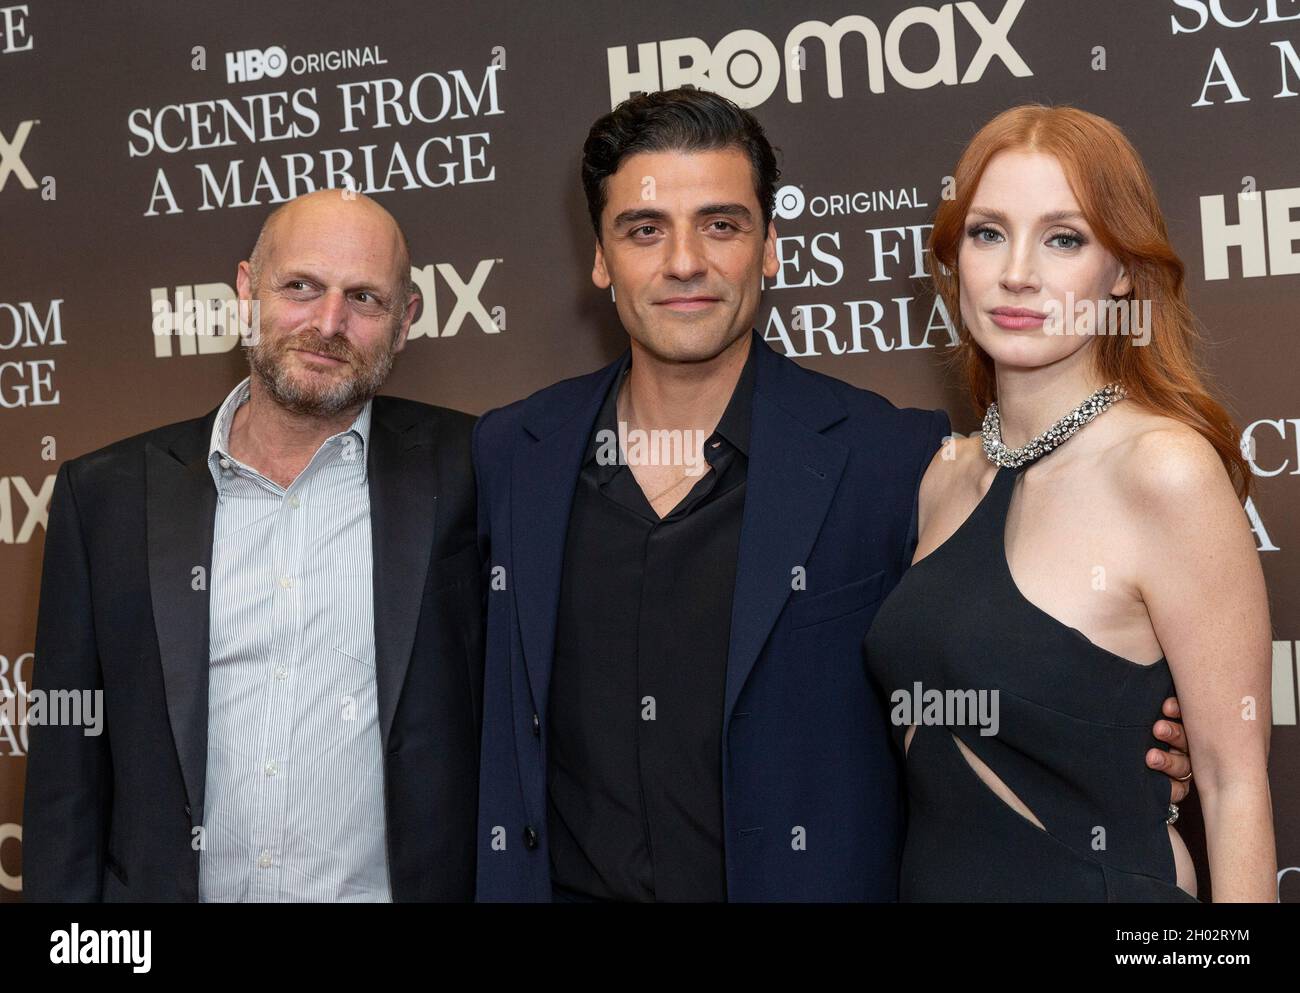 New York, NY - October 10, 2021: Hagai Levi, Oscar Isaac and Jessica Chastain attend screening of HBO Scenes From A Marriage at Museum of Modern Art Stock Photo